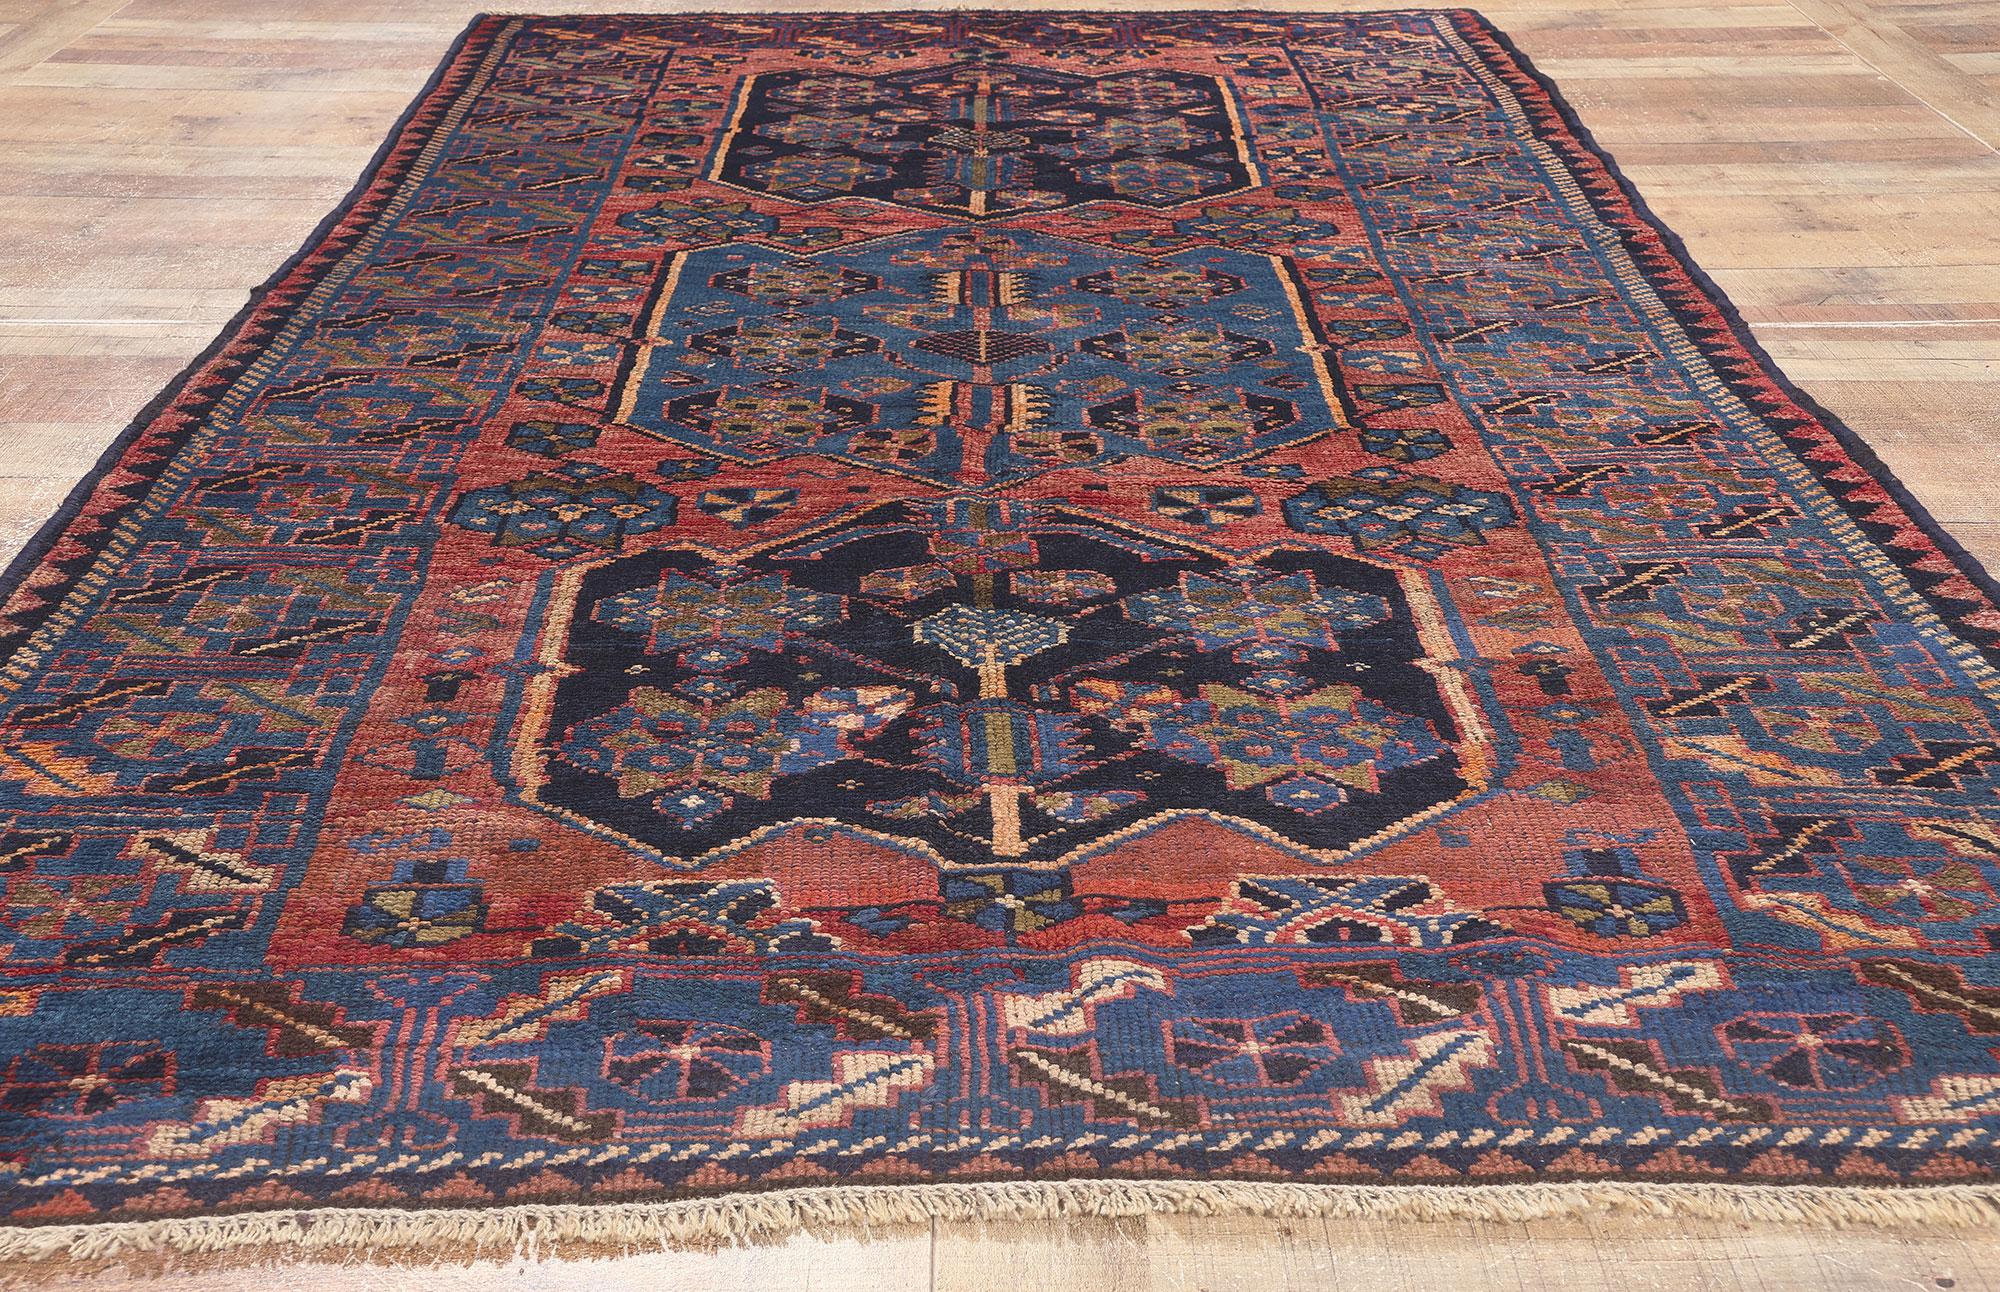 Antique Persian Tribal Shiraz Rug with Qashqai Tribe Influence For Sale 2